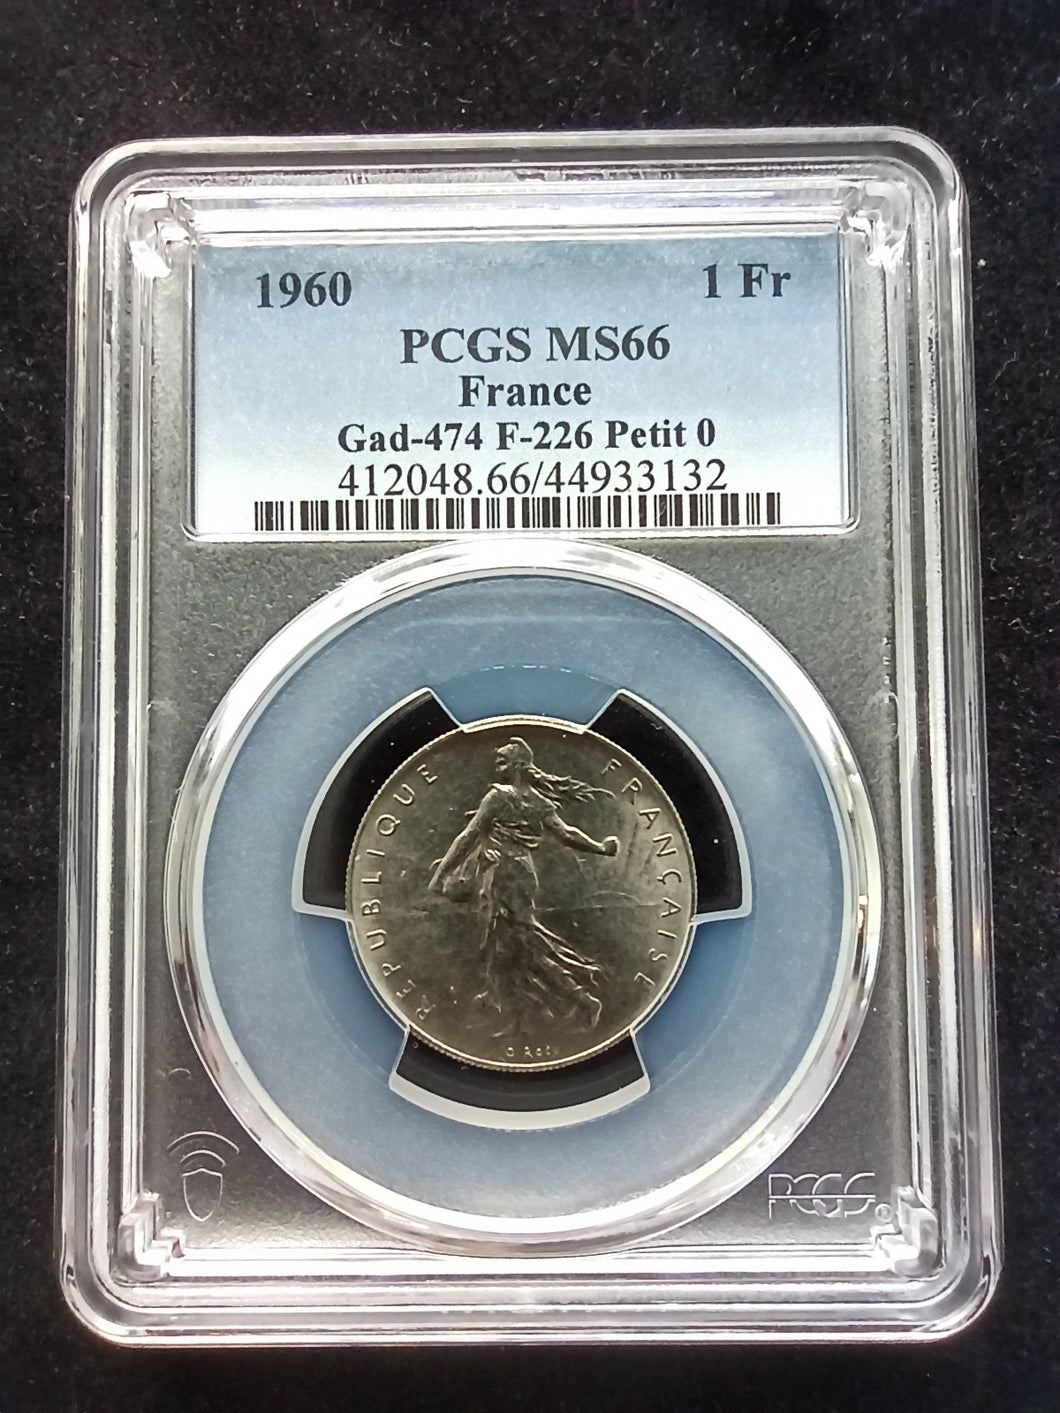 France : 1 Franc Semeuse 1960 First Issue ; PCGS MS 66